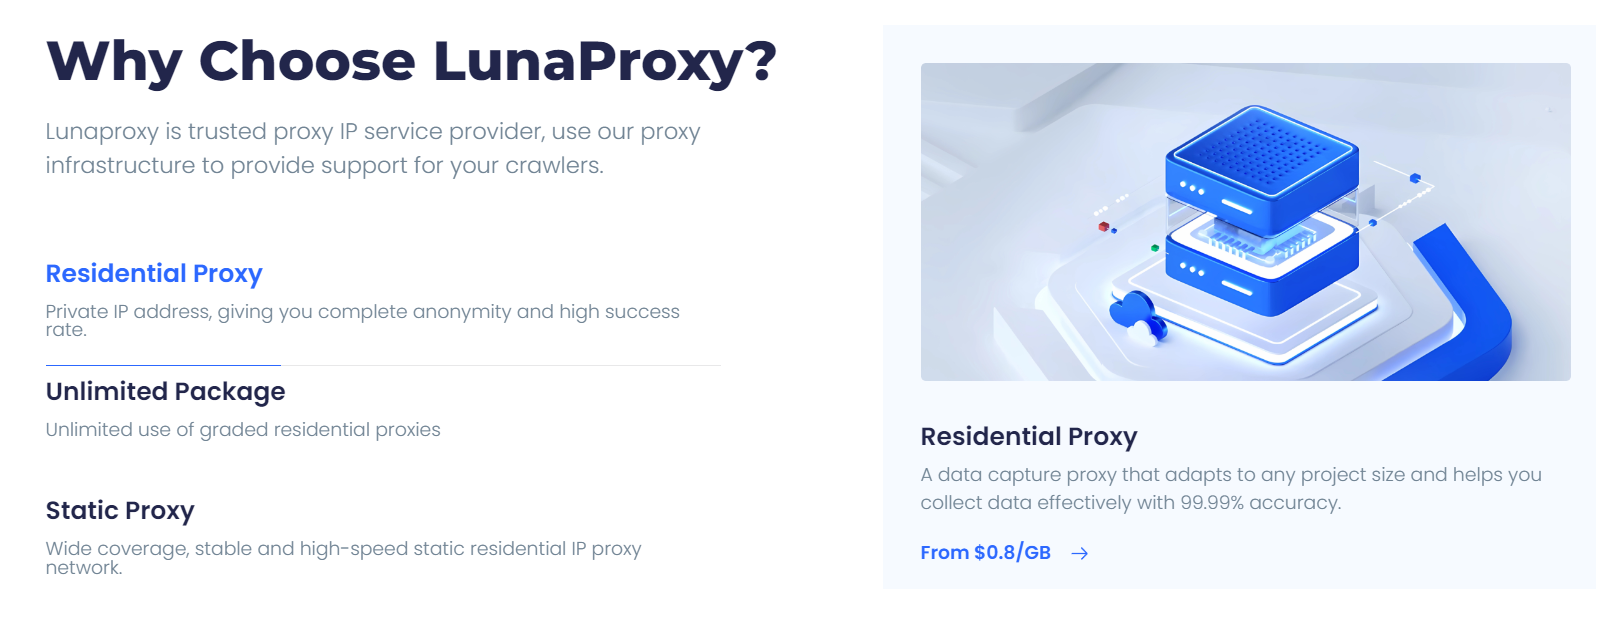 Services Offered by LunaProxy